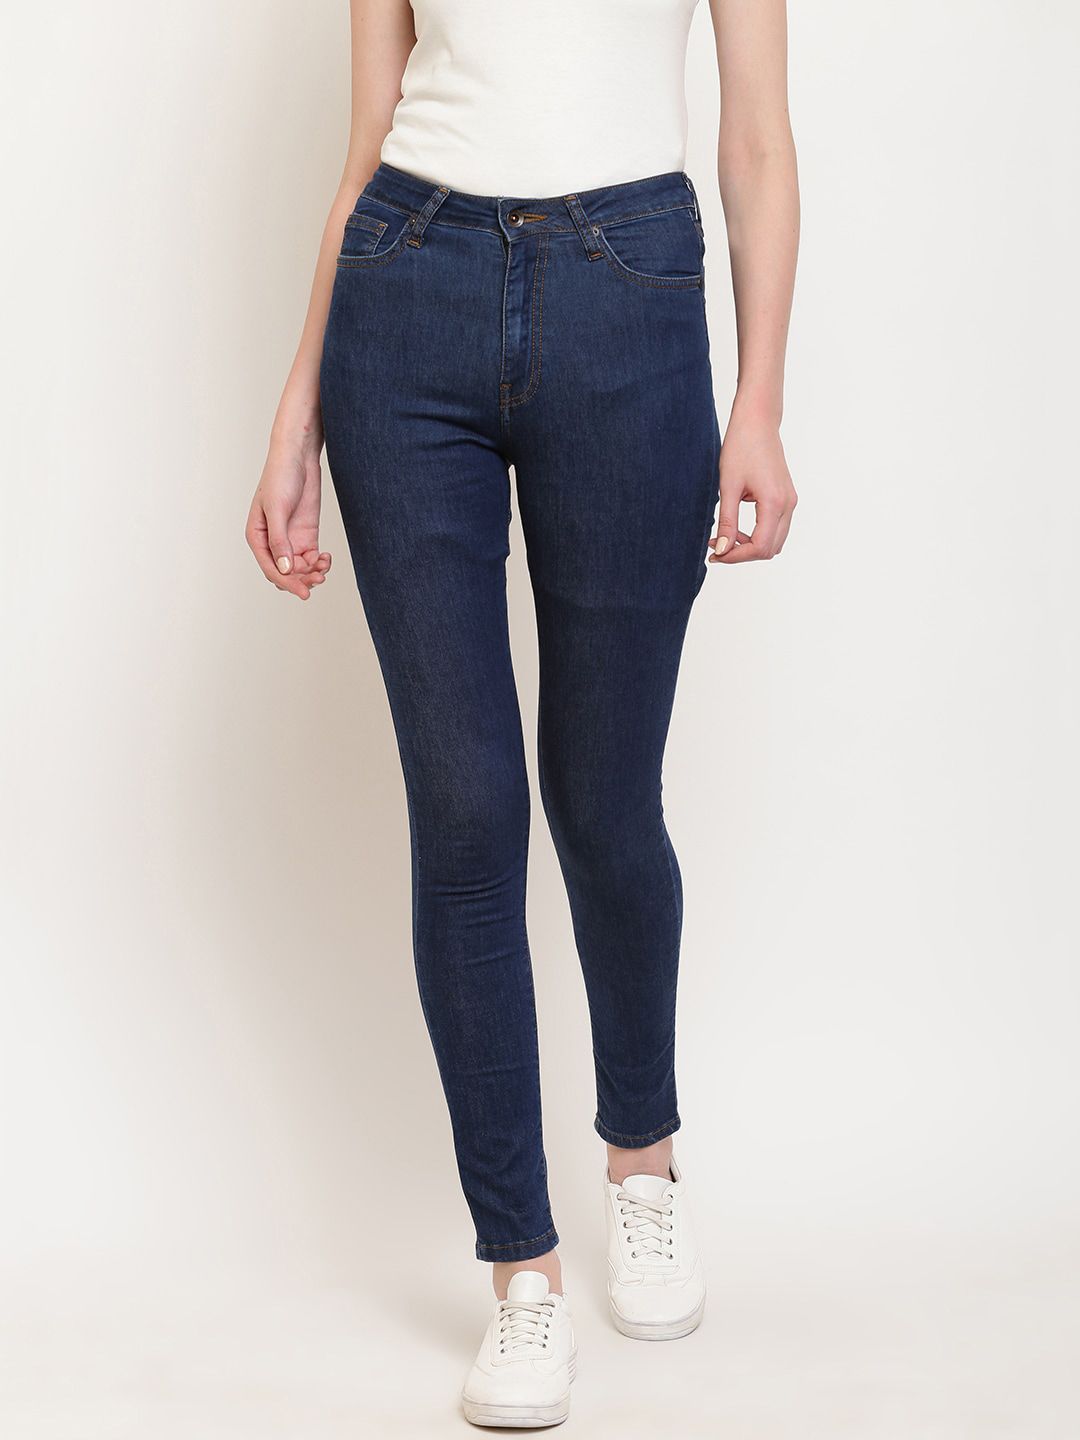 Pepe Jeans Women Blue Slim Fit Mid-Rise Clean Look Jeans Price in India